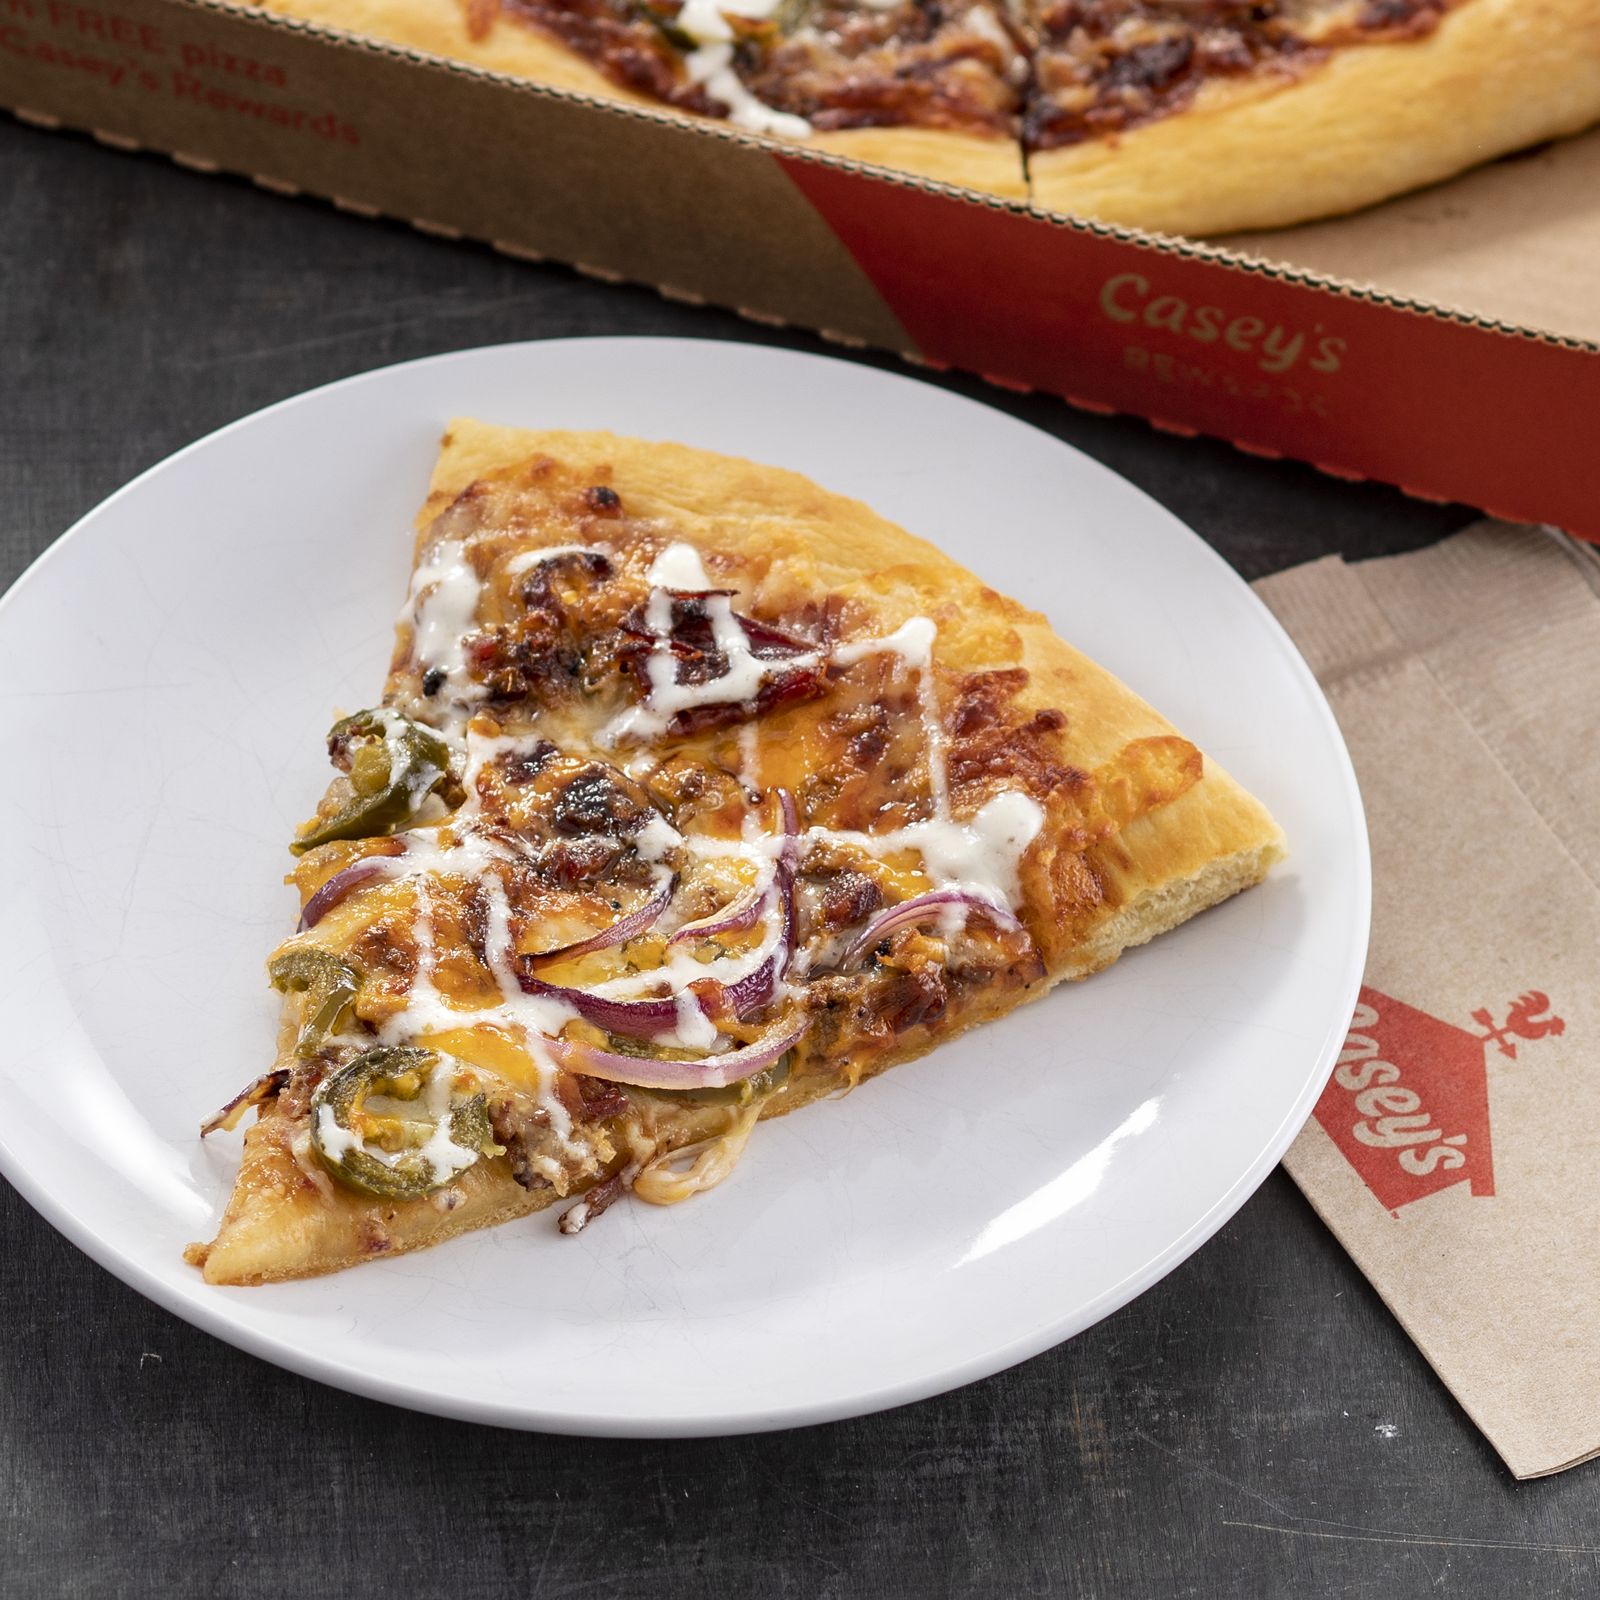 Casey's Launches Limited-Time, All-New BBQ Brisket Pizza